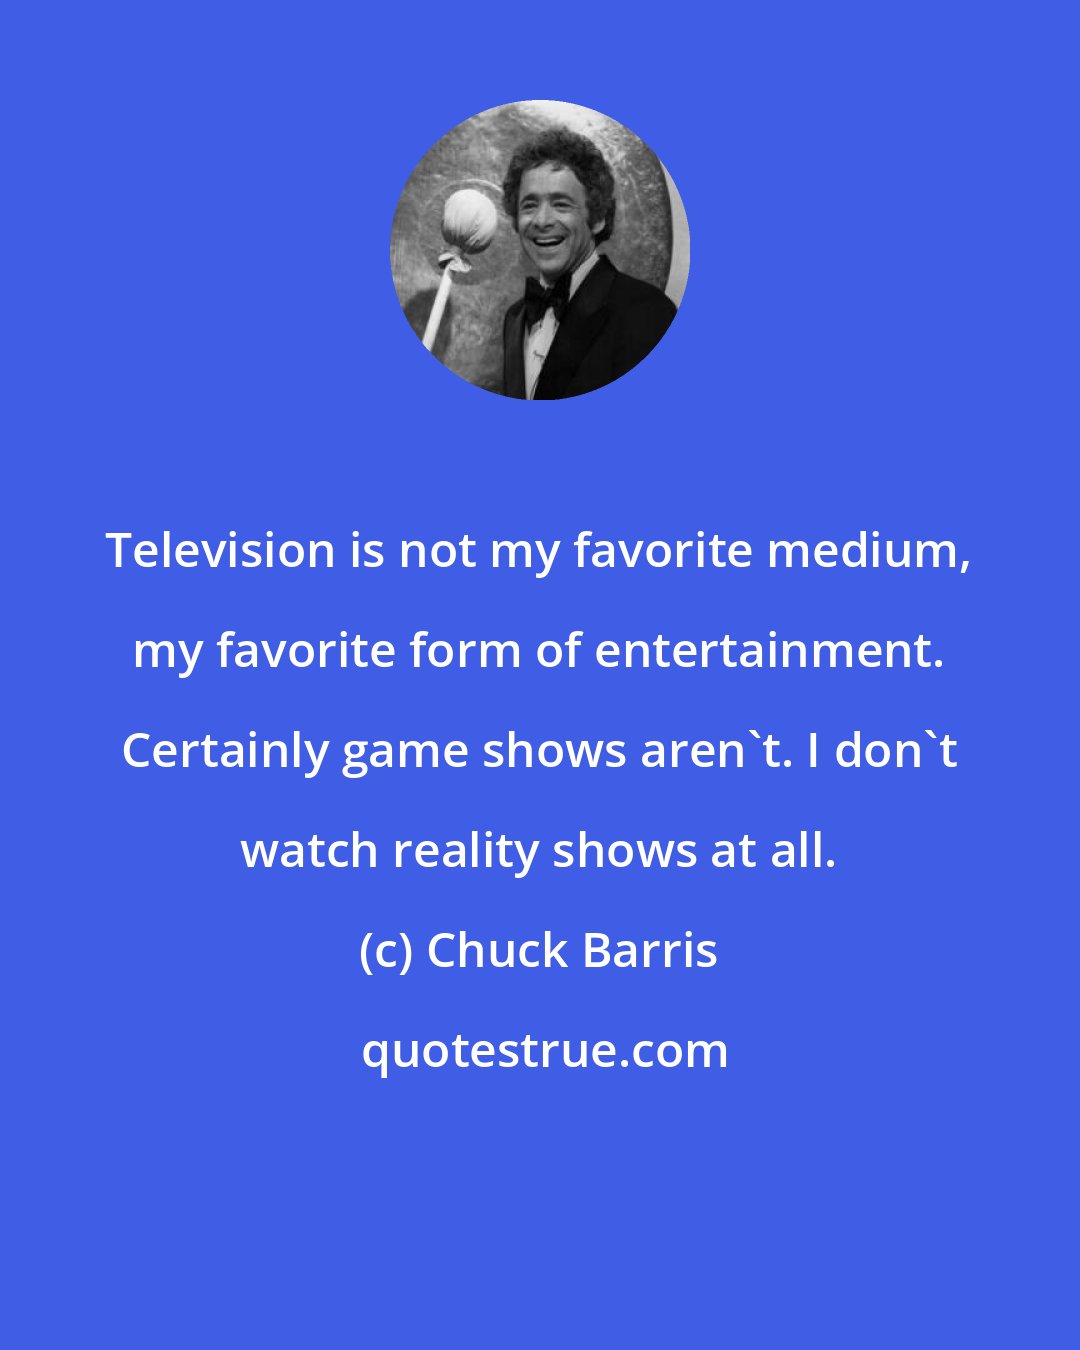 Chuck Barris: Television is not my favorite medium, my favorite form of entertainment. Certainly game shows aren't. I don't watch reality shows at all.